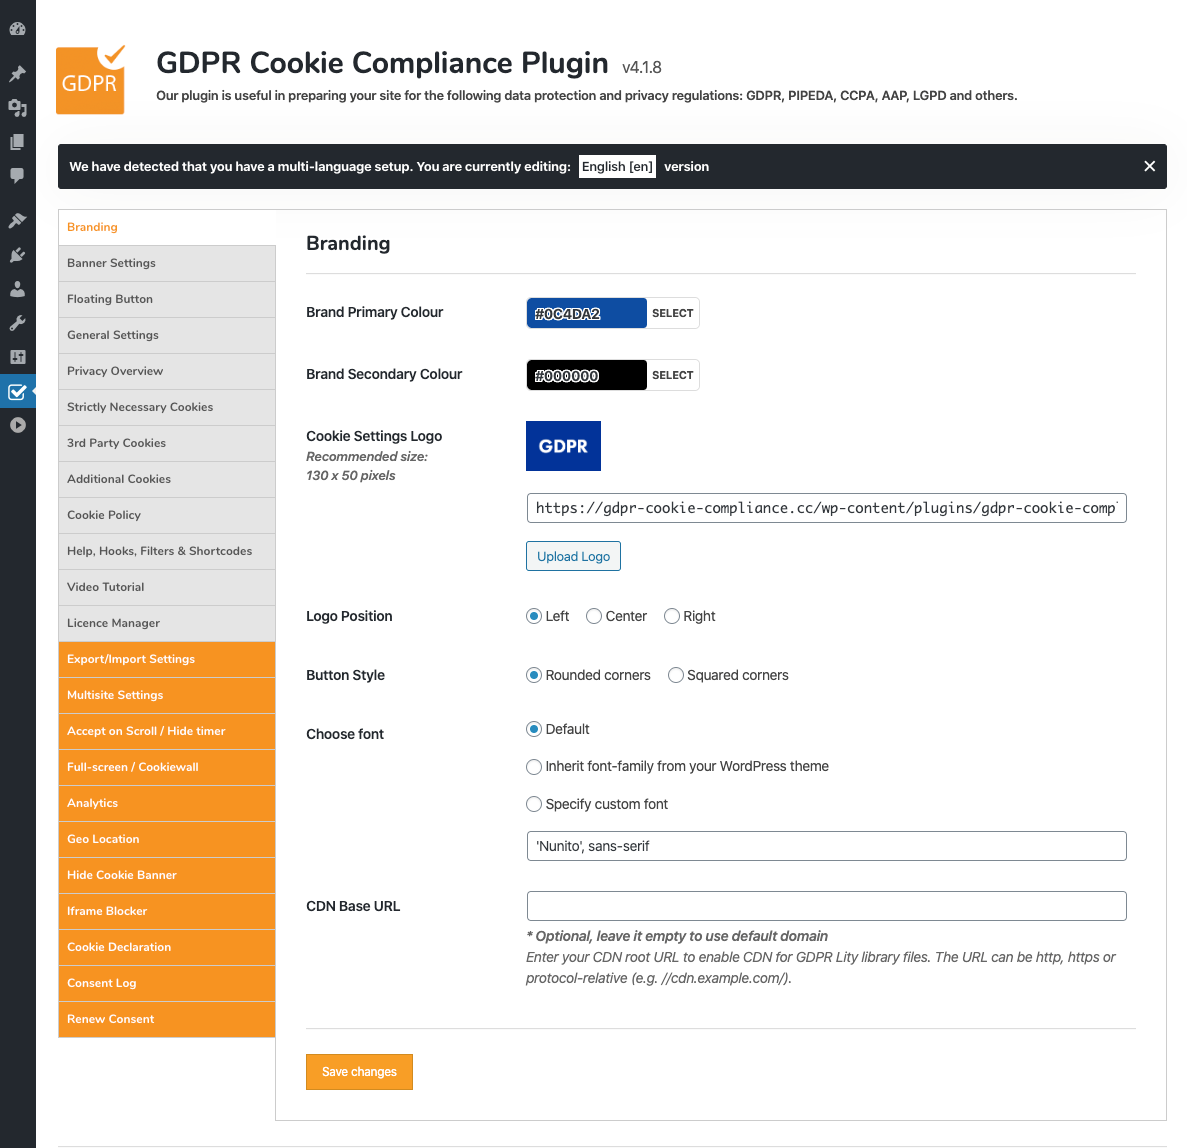 GDPR Cookie Compliance - Front-end - Cookie Policy